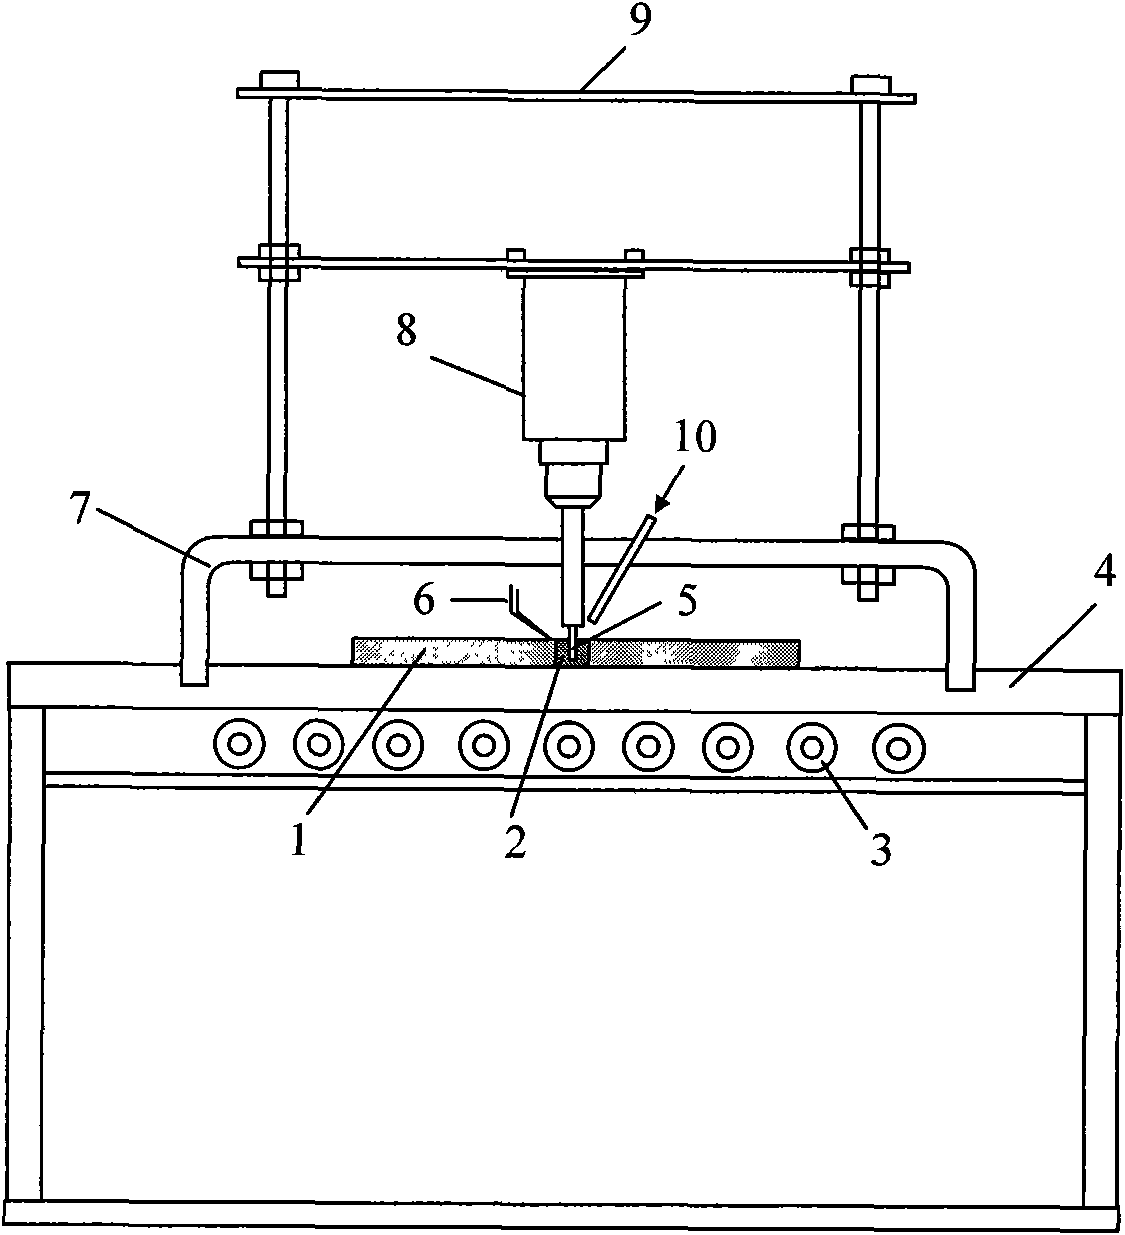 Non-vacuum semi-solid stirring brazing method for aluminum alloy and composite material thereof